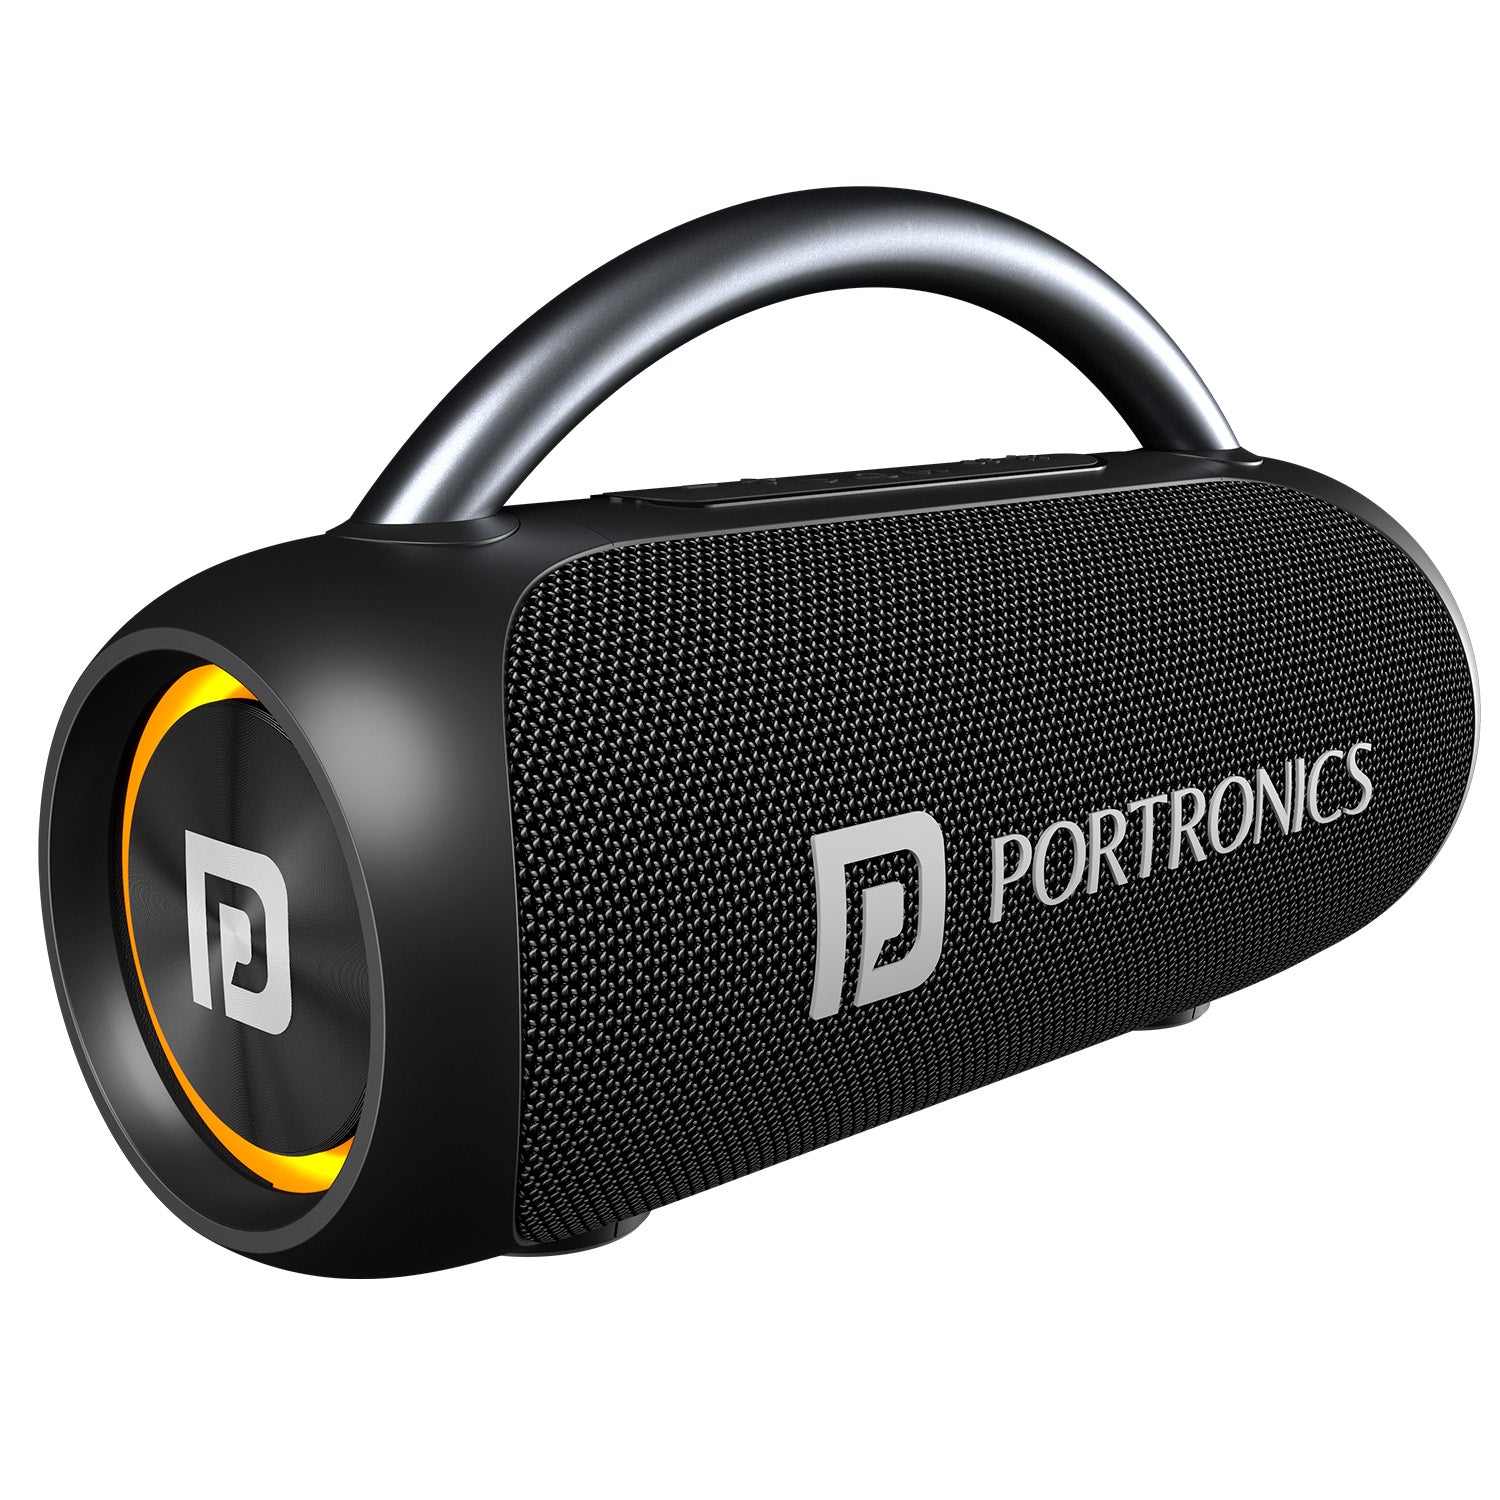 Buy Portronics Resound Mini Bluetooth Speaker for iOS & Android 5W